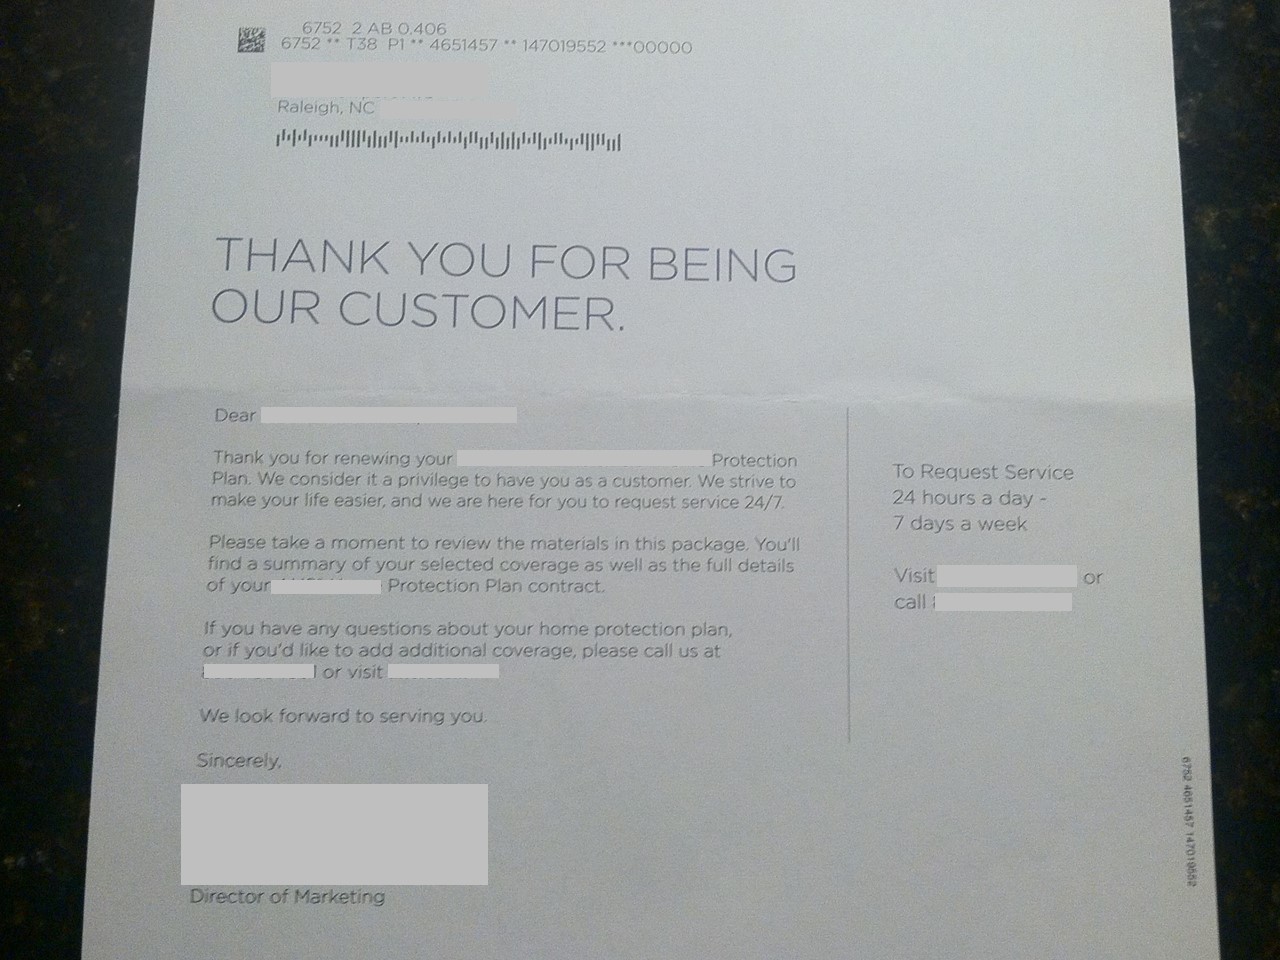 This letter is not from a health plan or provider, but clearly shows me the love as a customer.